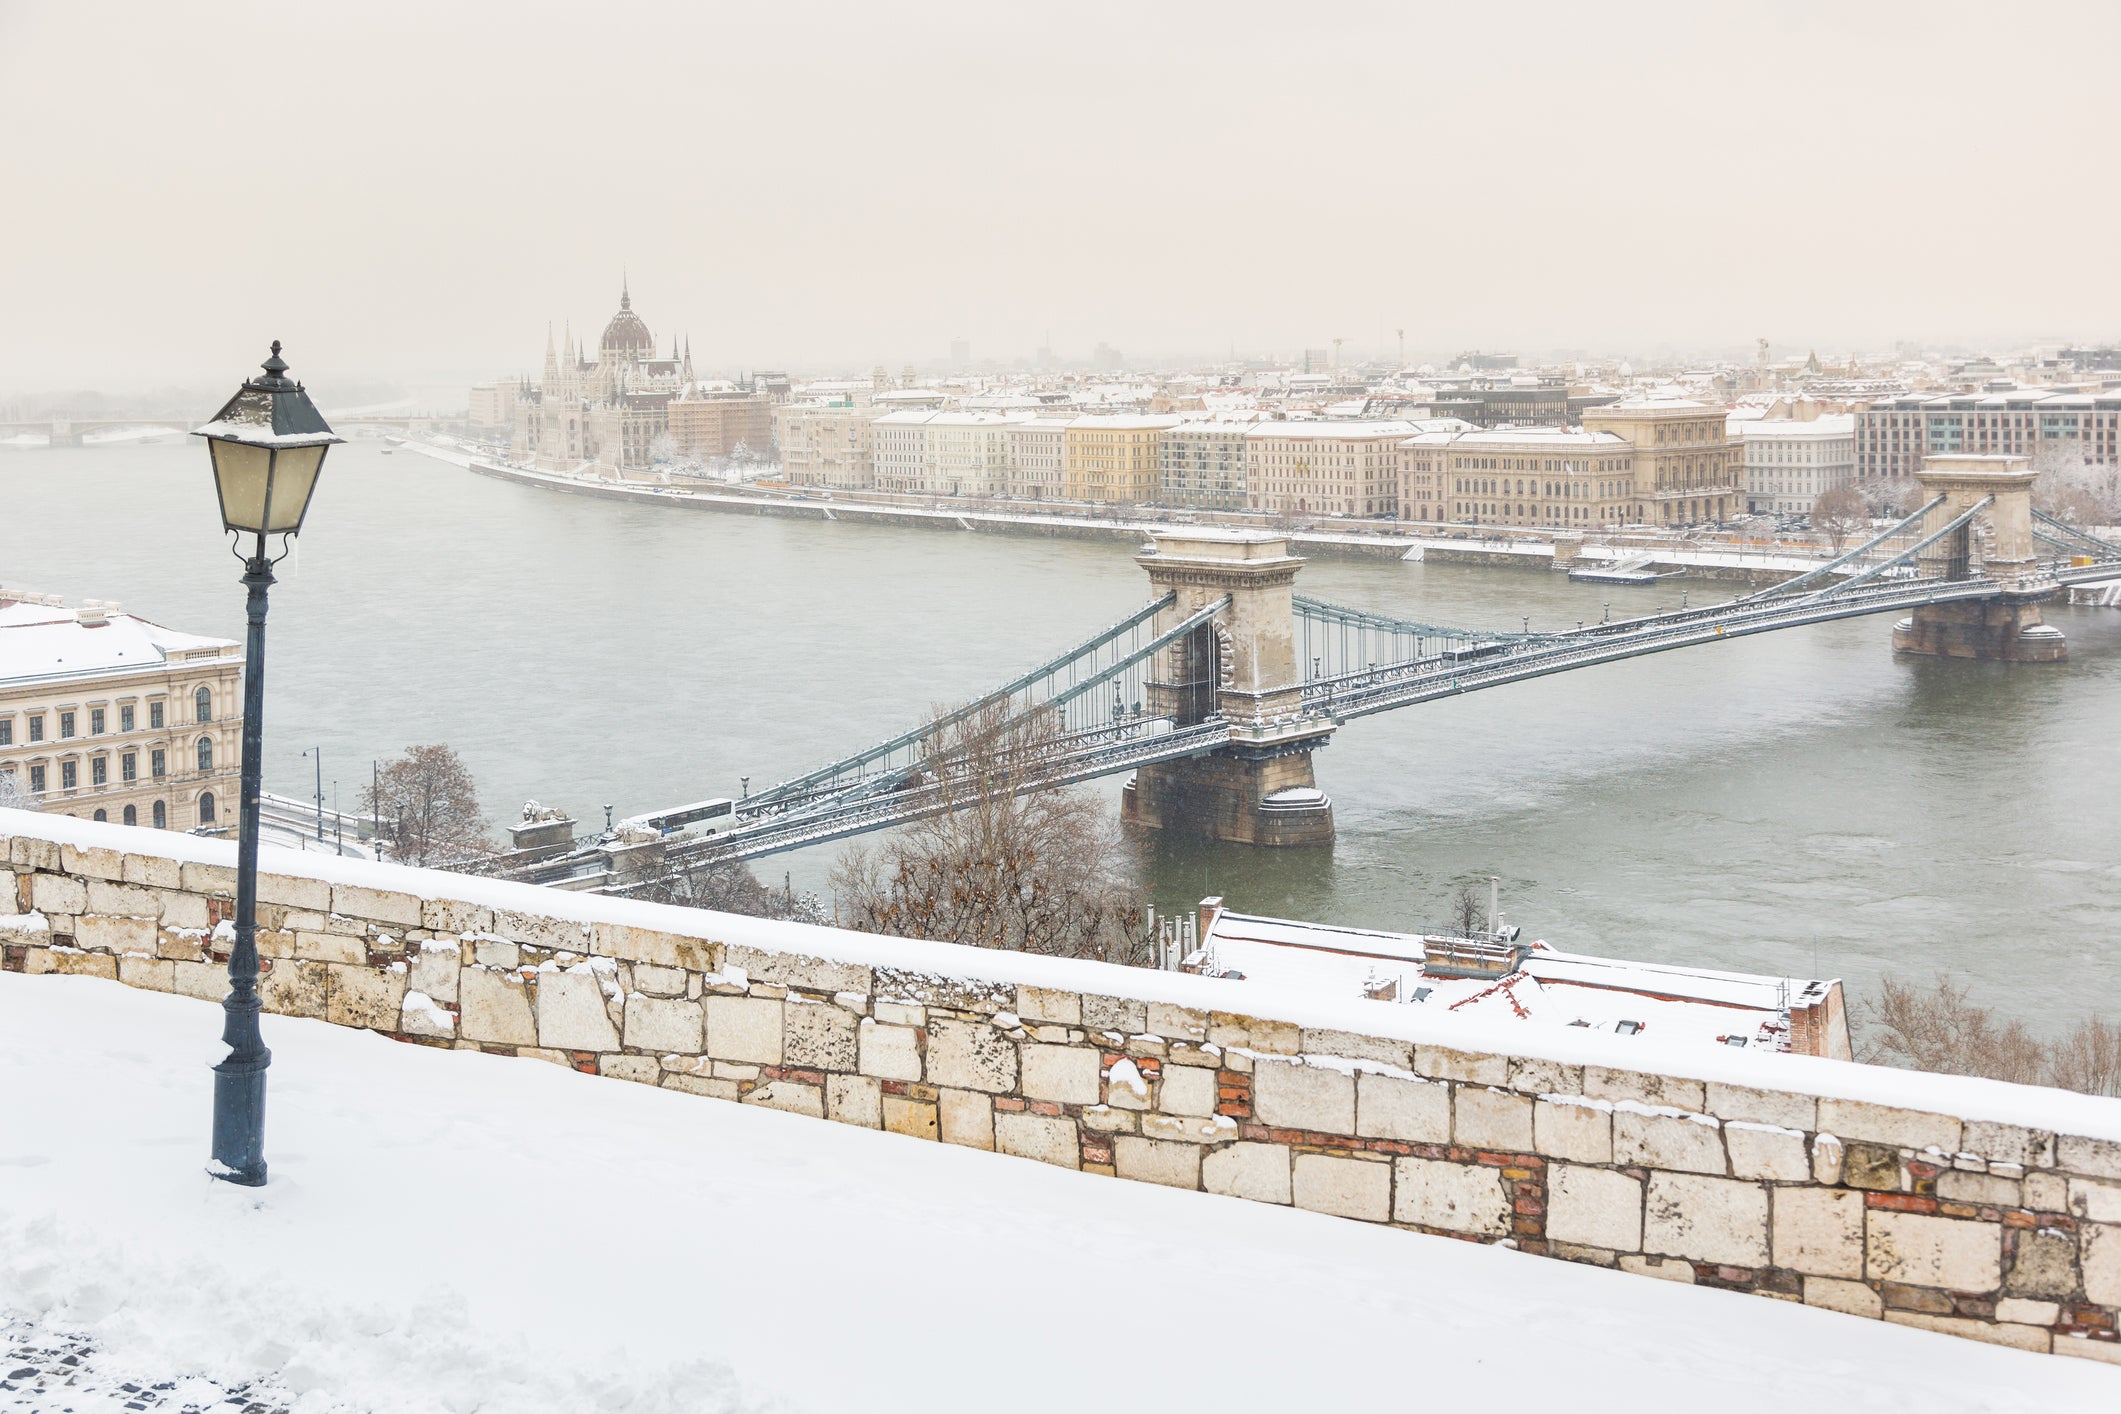 Yuletide markets, enchanting castles and folklore shows await on the Danube